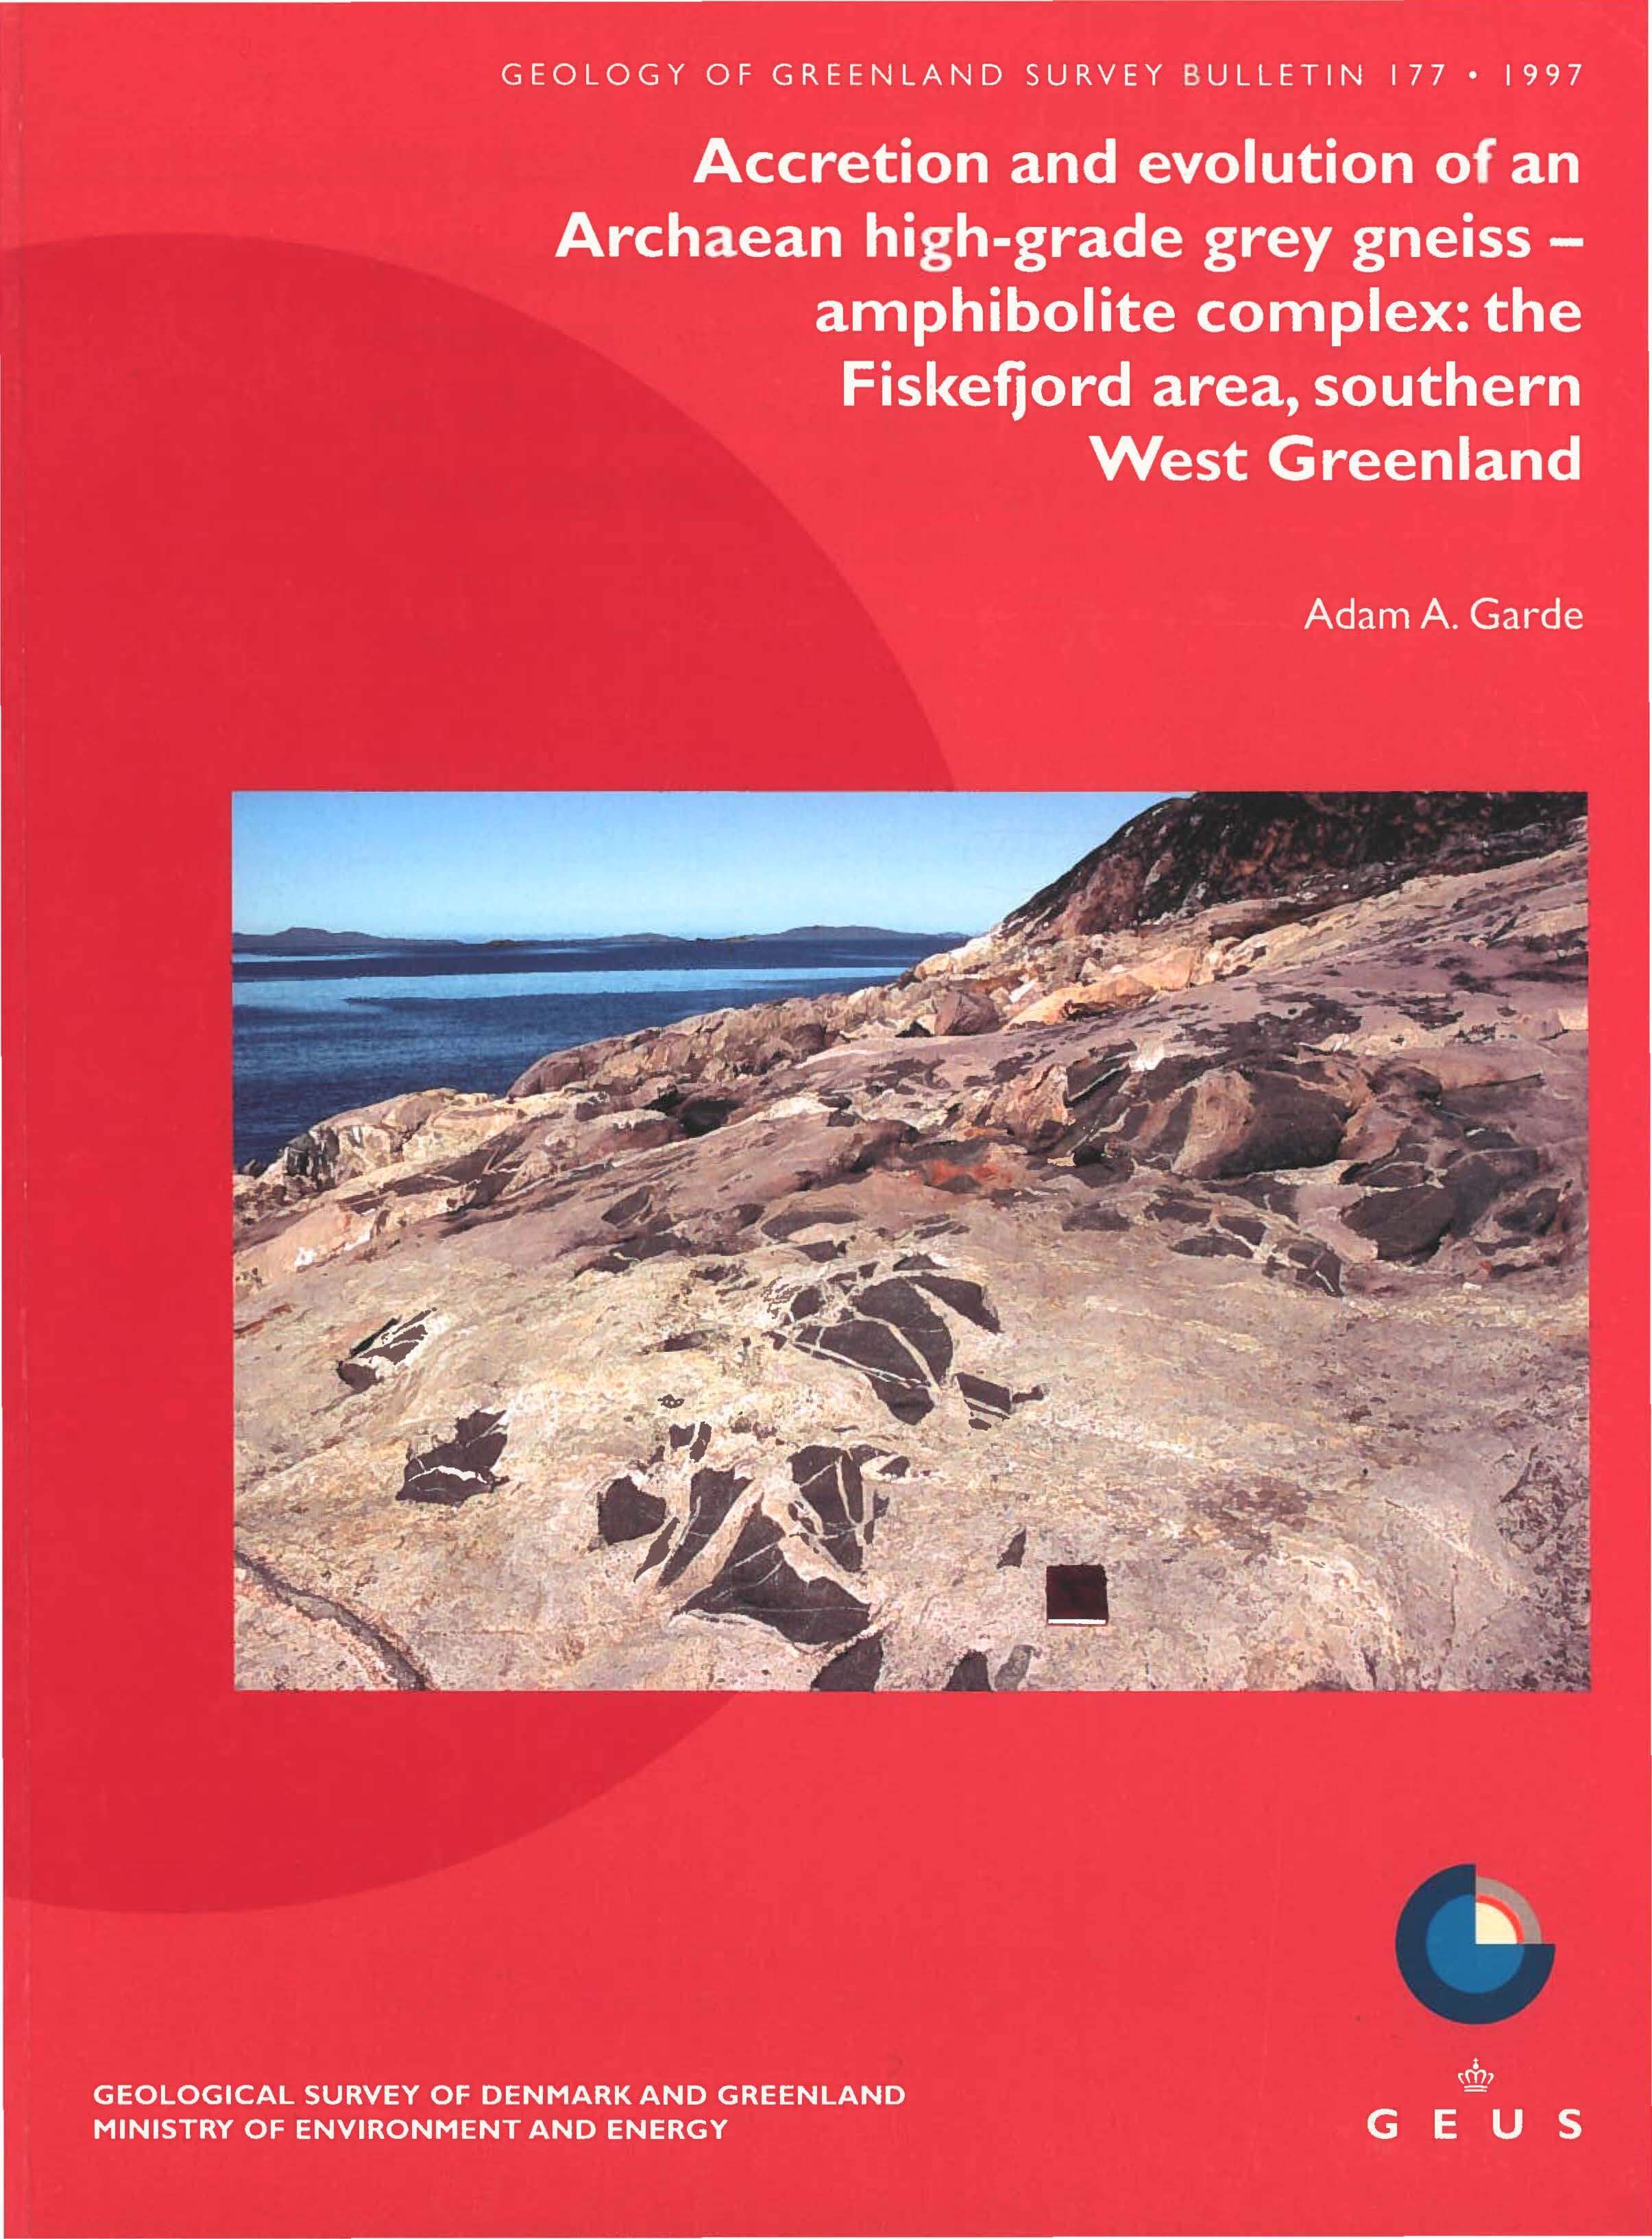 Geology of Greenland Survey Bulletin 177 cover photo showing rocks in front of fjord